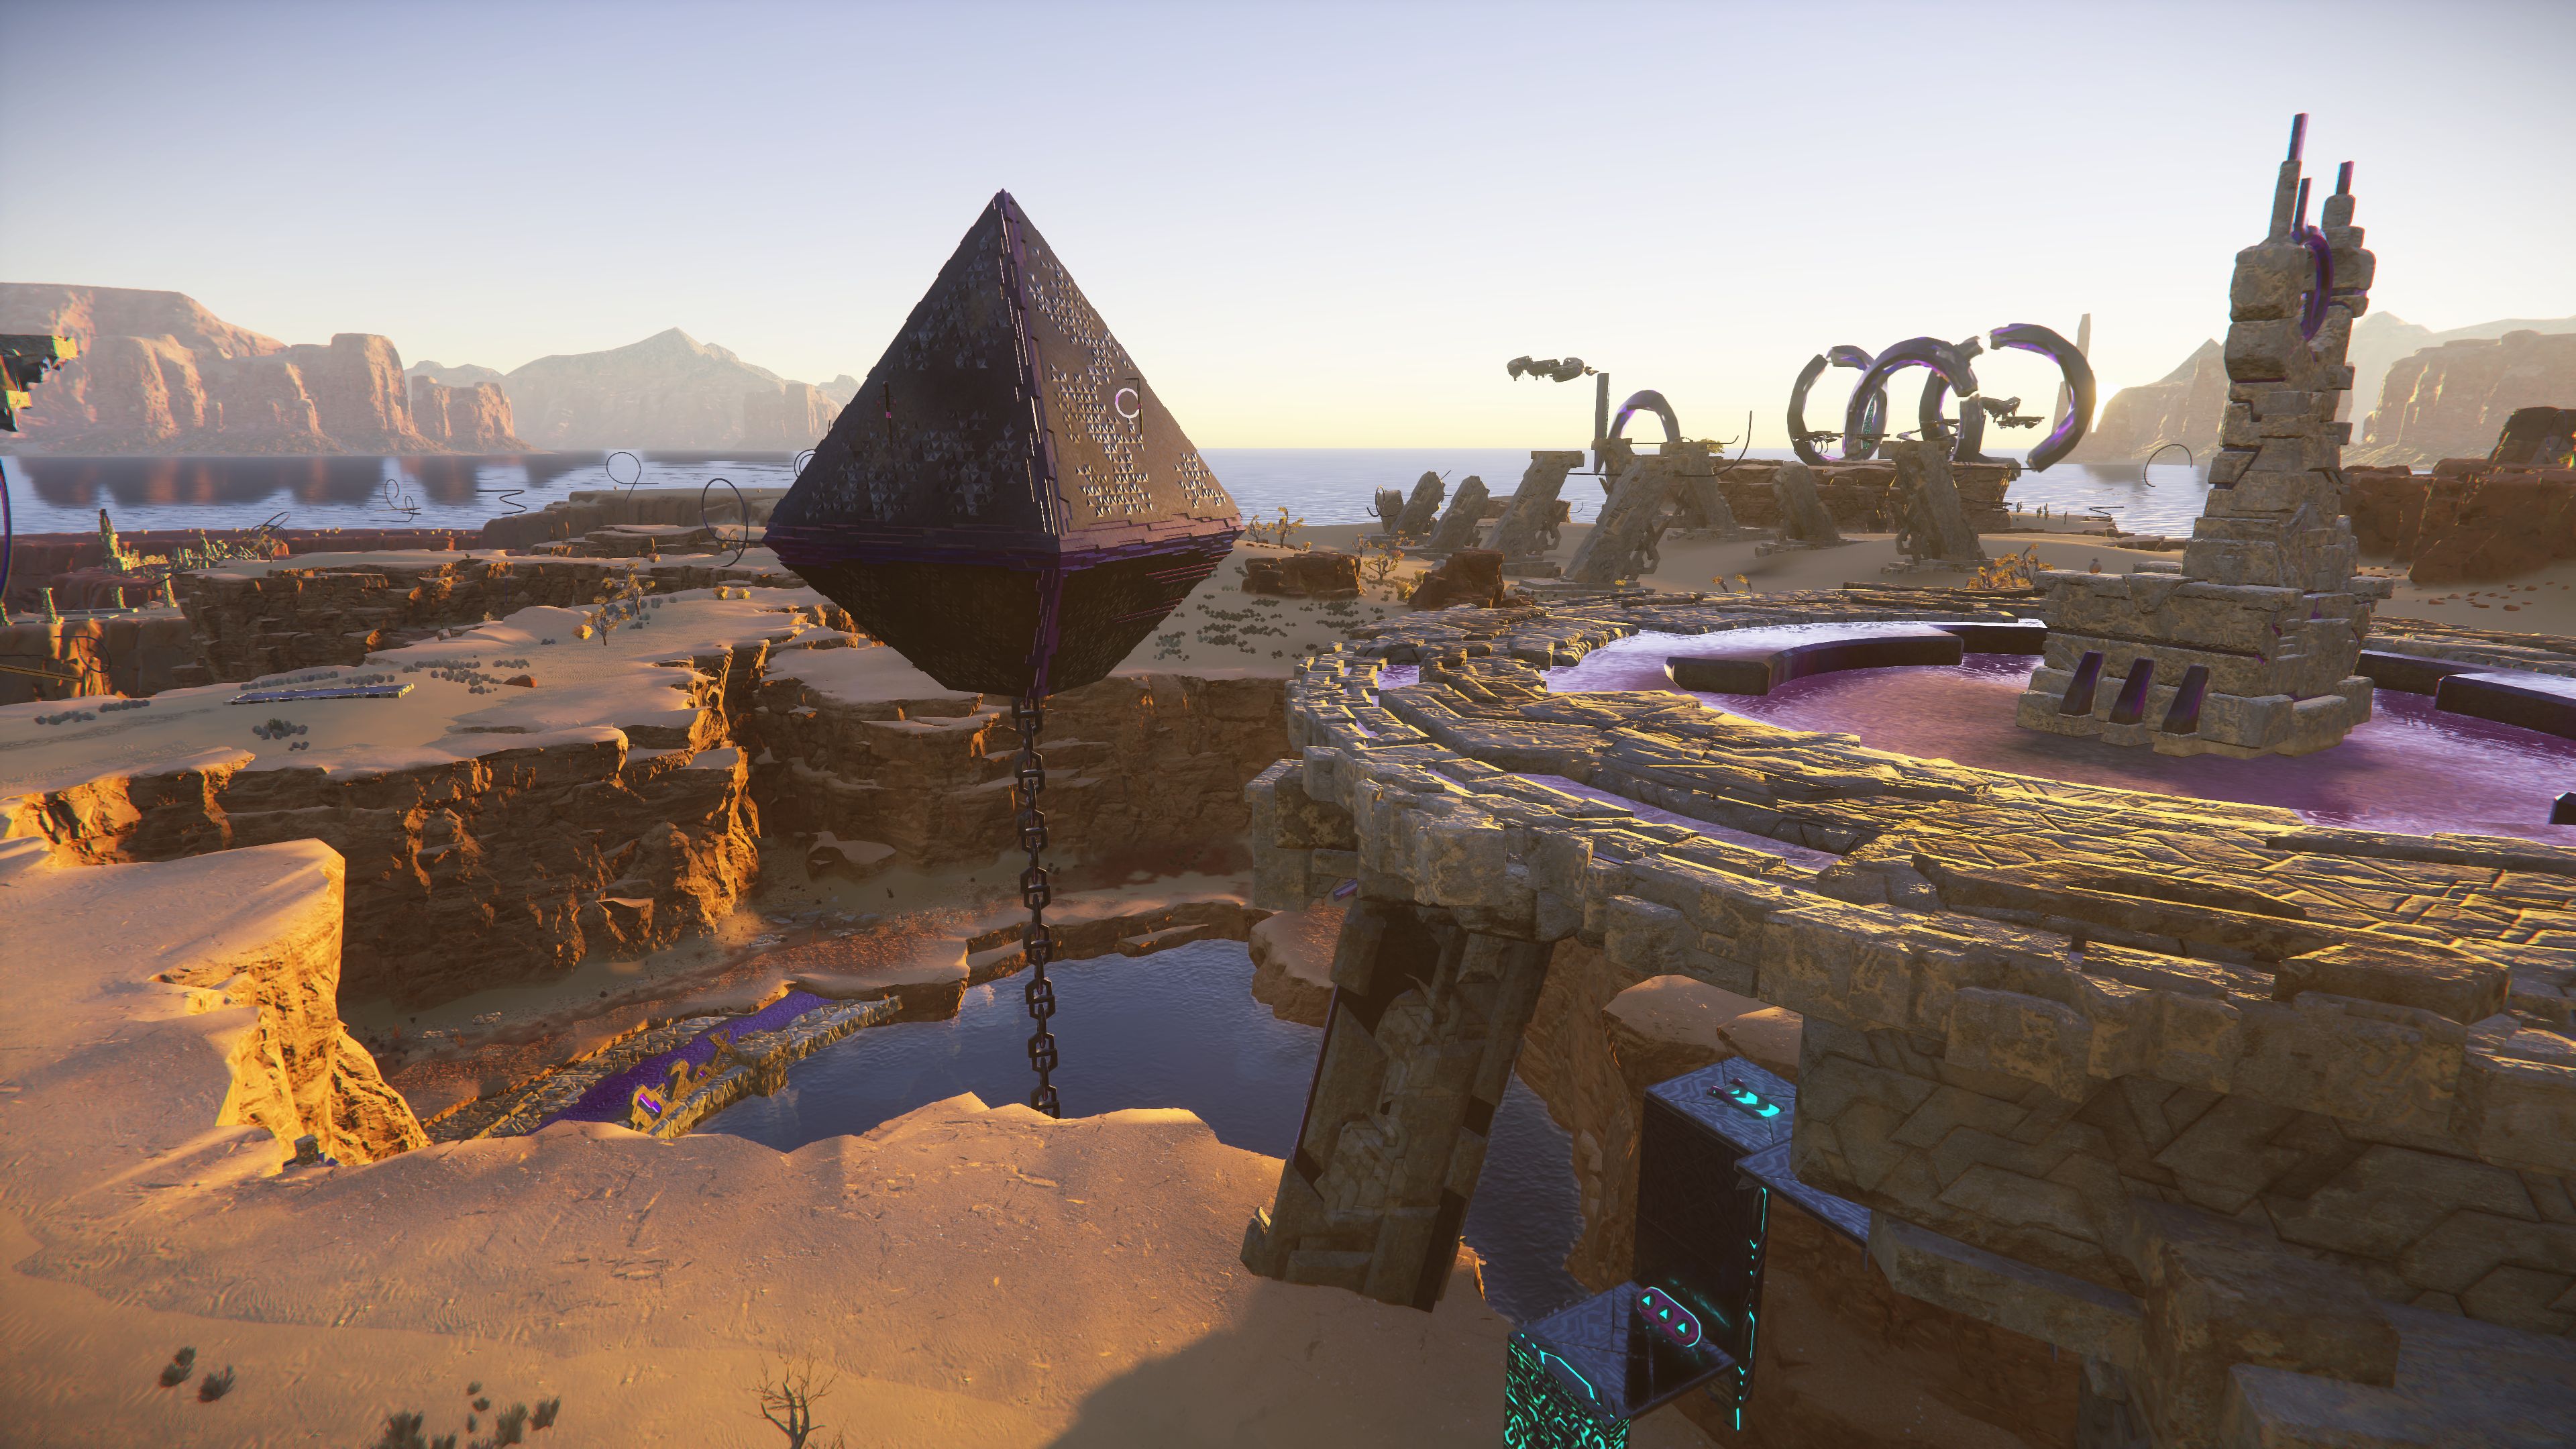 Sonic Frontiers preview - a desert open zone with a strange upside-down diamond-shaped structure